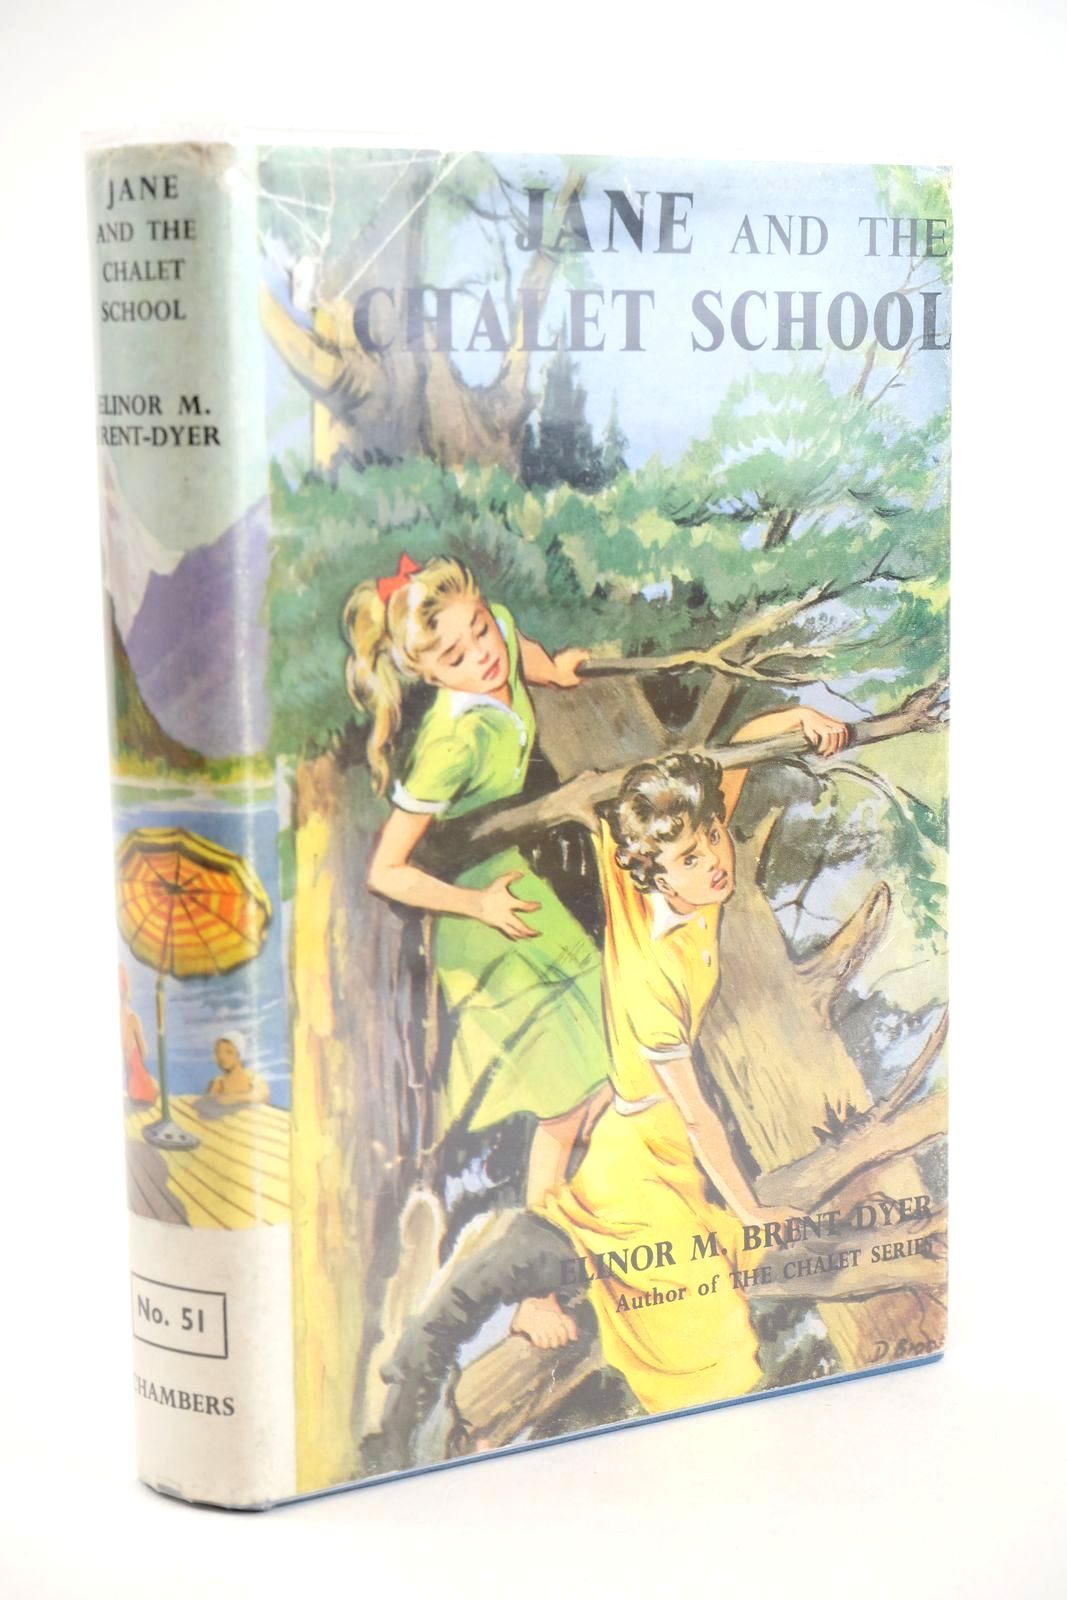 Photo of JANE AND THE CHALET SCHOOL written by Brent-Dyer, Elinor M. published by W. &amp; R. Chambers Limited (STOCK CODE: 1324017)  for sale by Stella & Rose's Books